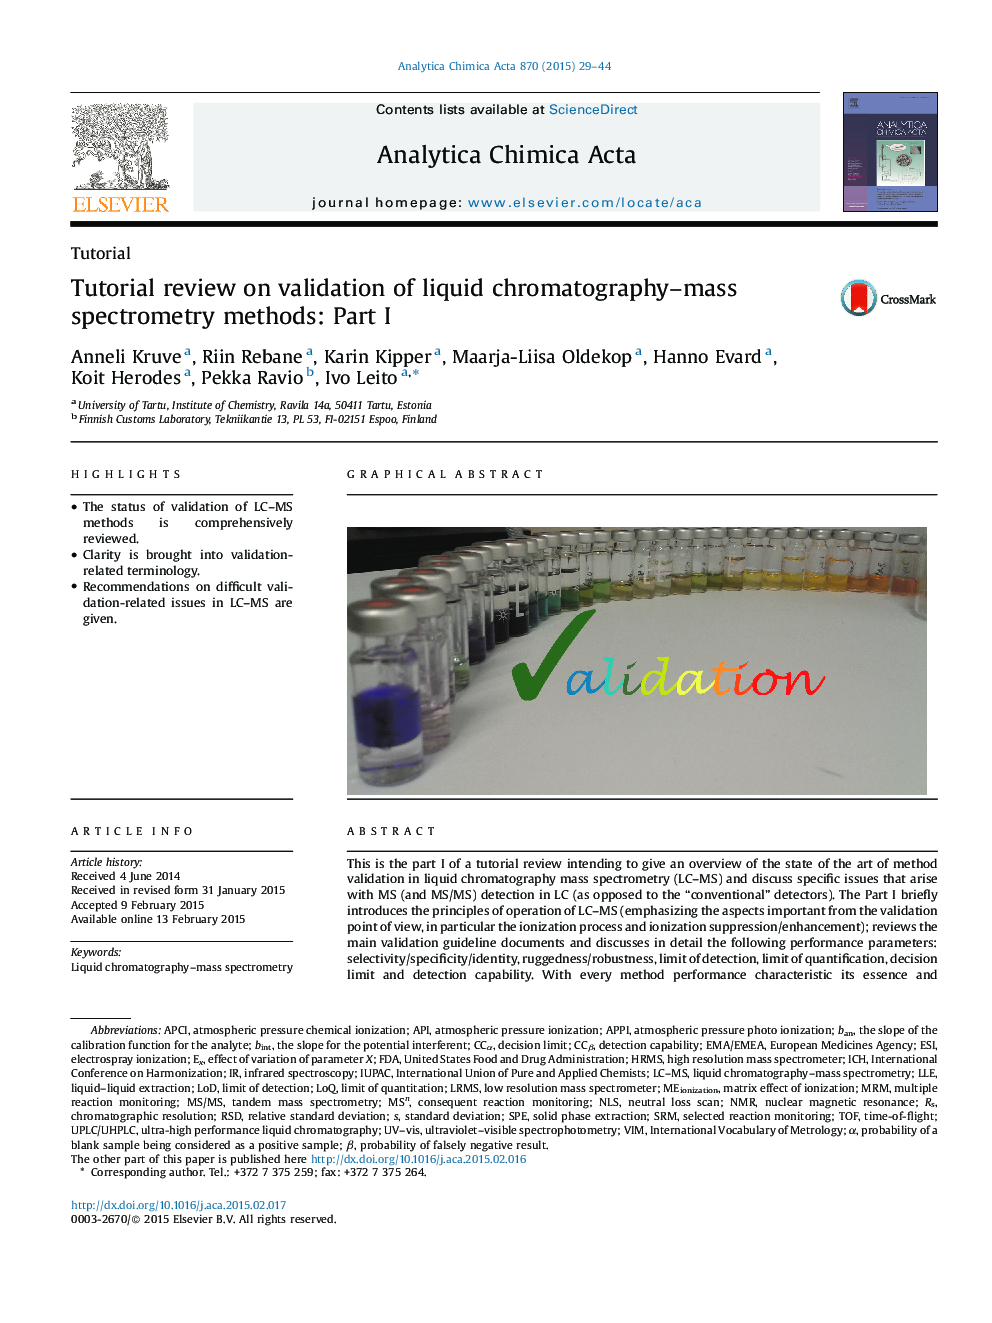 Tutorial review on validation of liquid chromatography–mass spectrometry methods: Part I